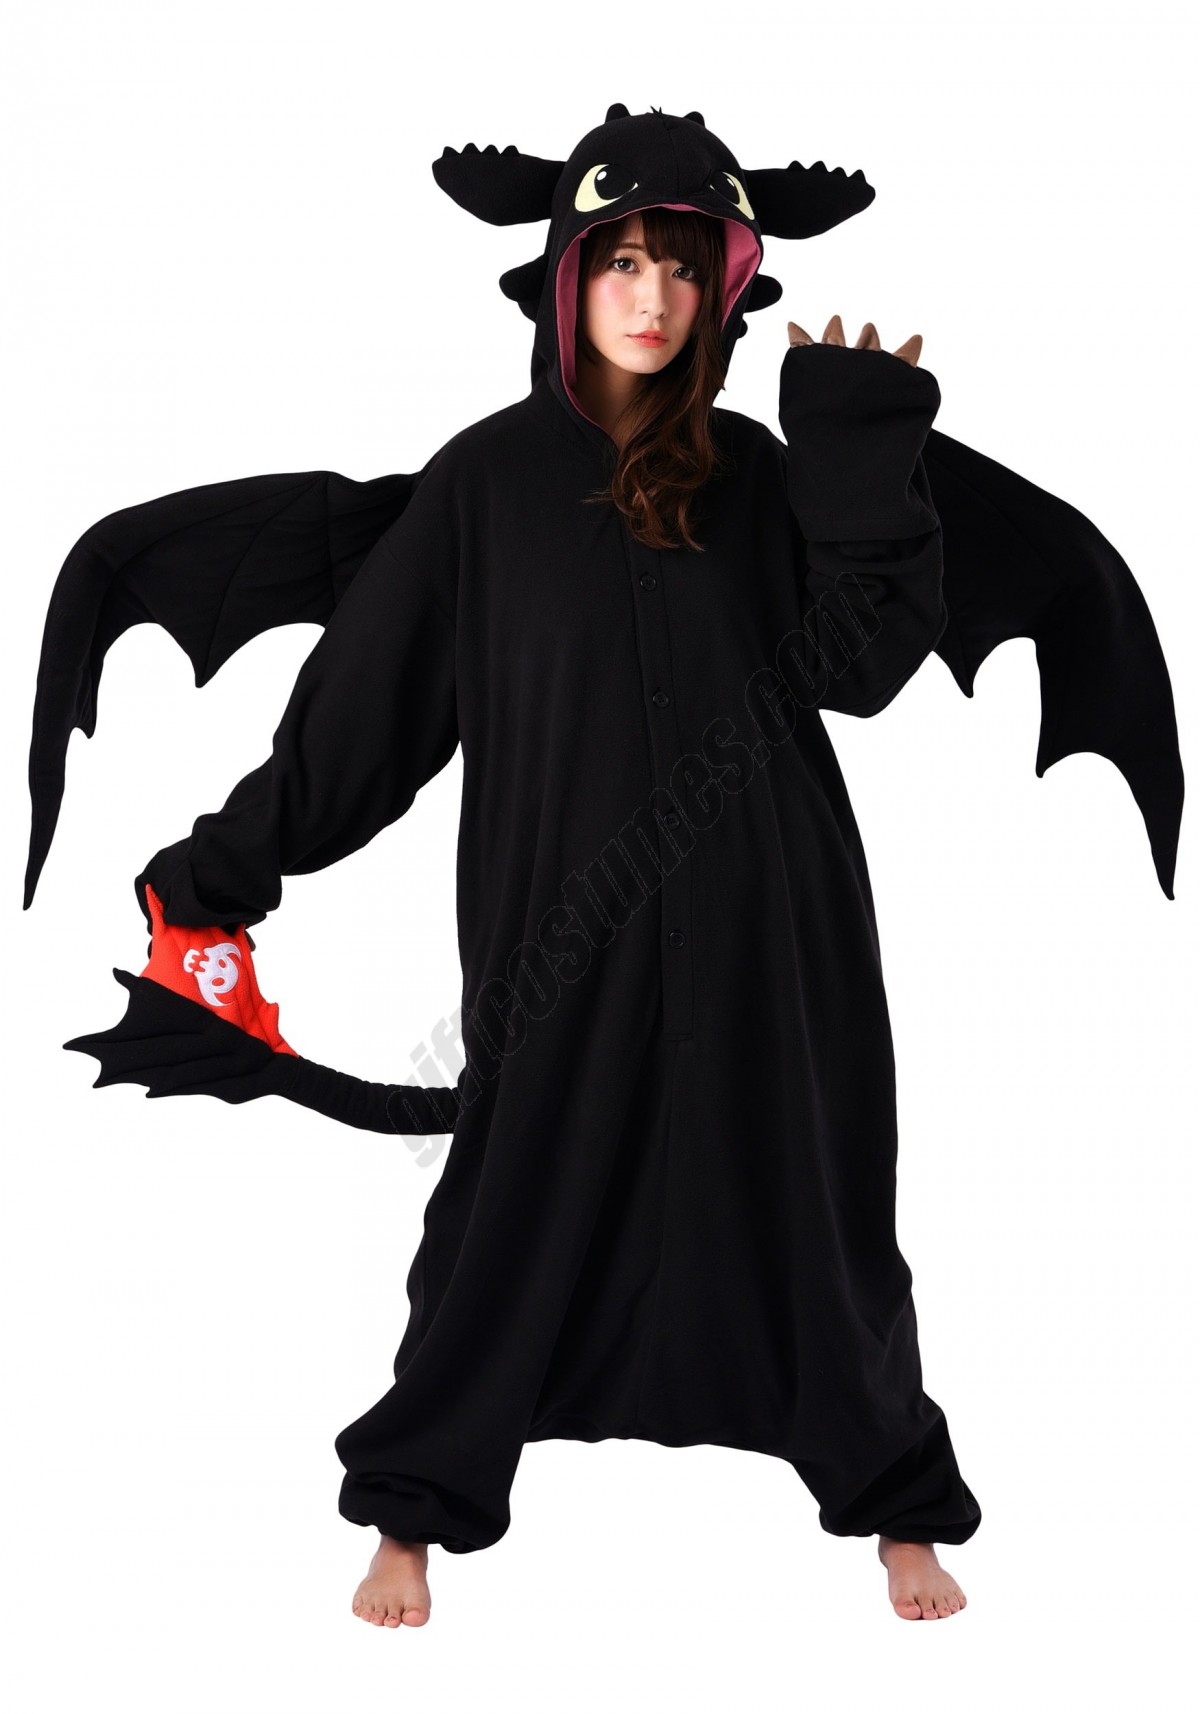 How to Train Your Dragon Toothless Adult Kigurumi Costume - Men's - -0